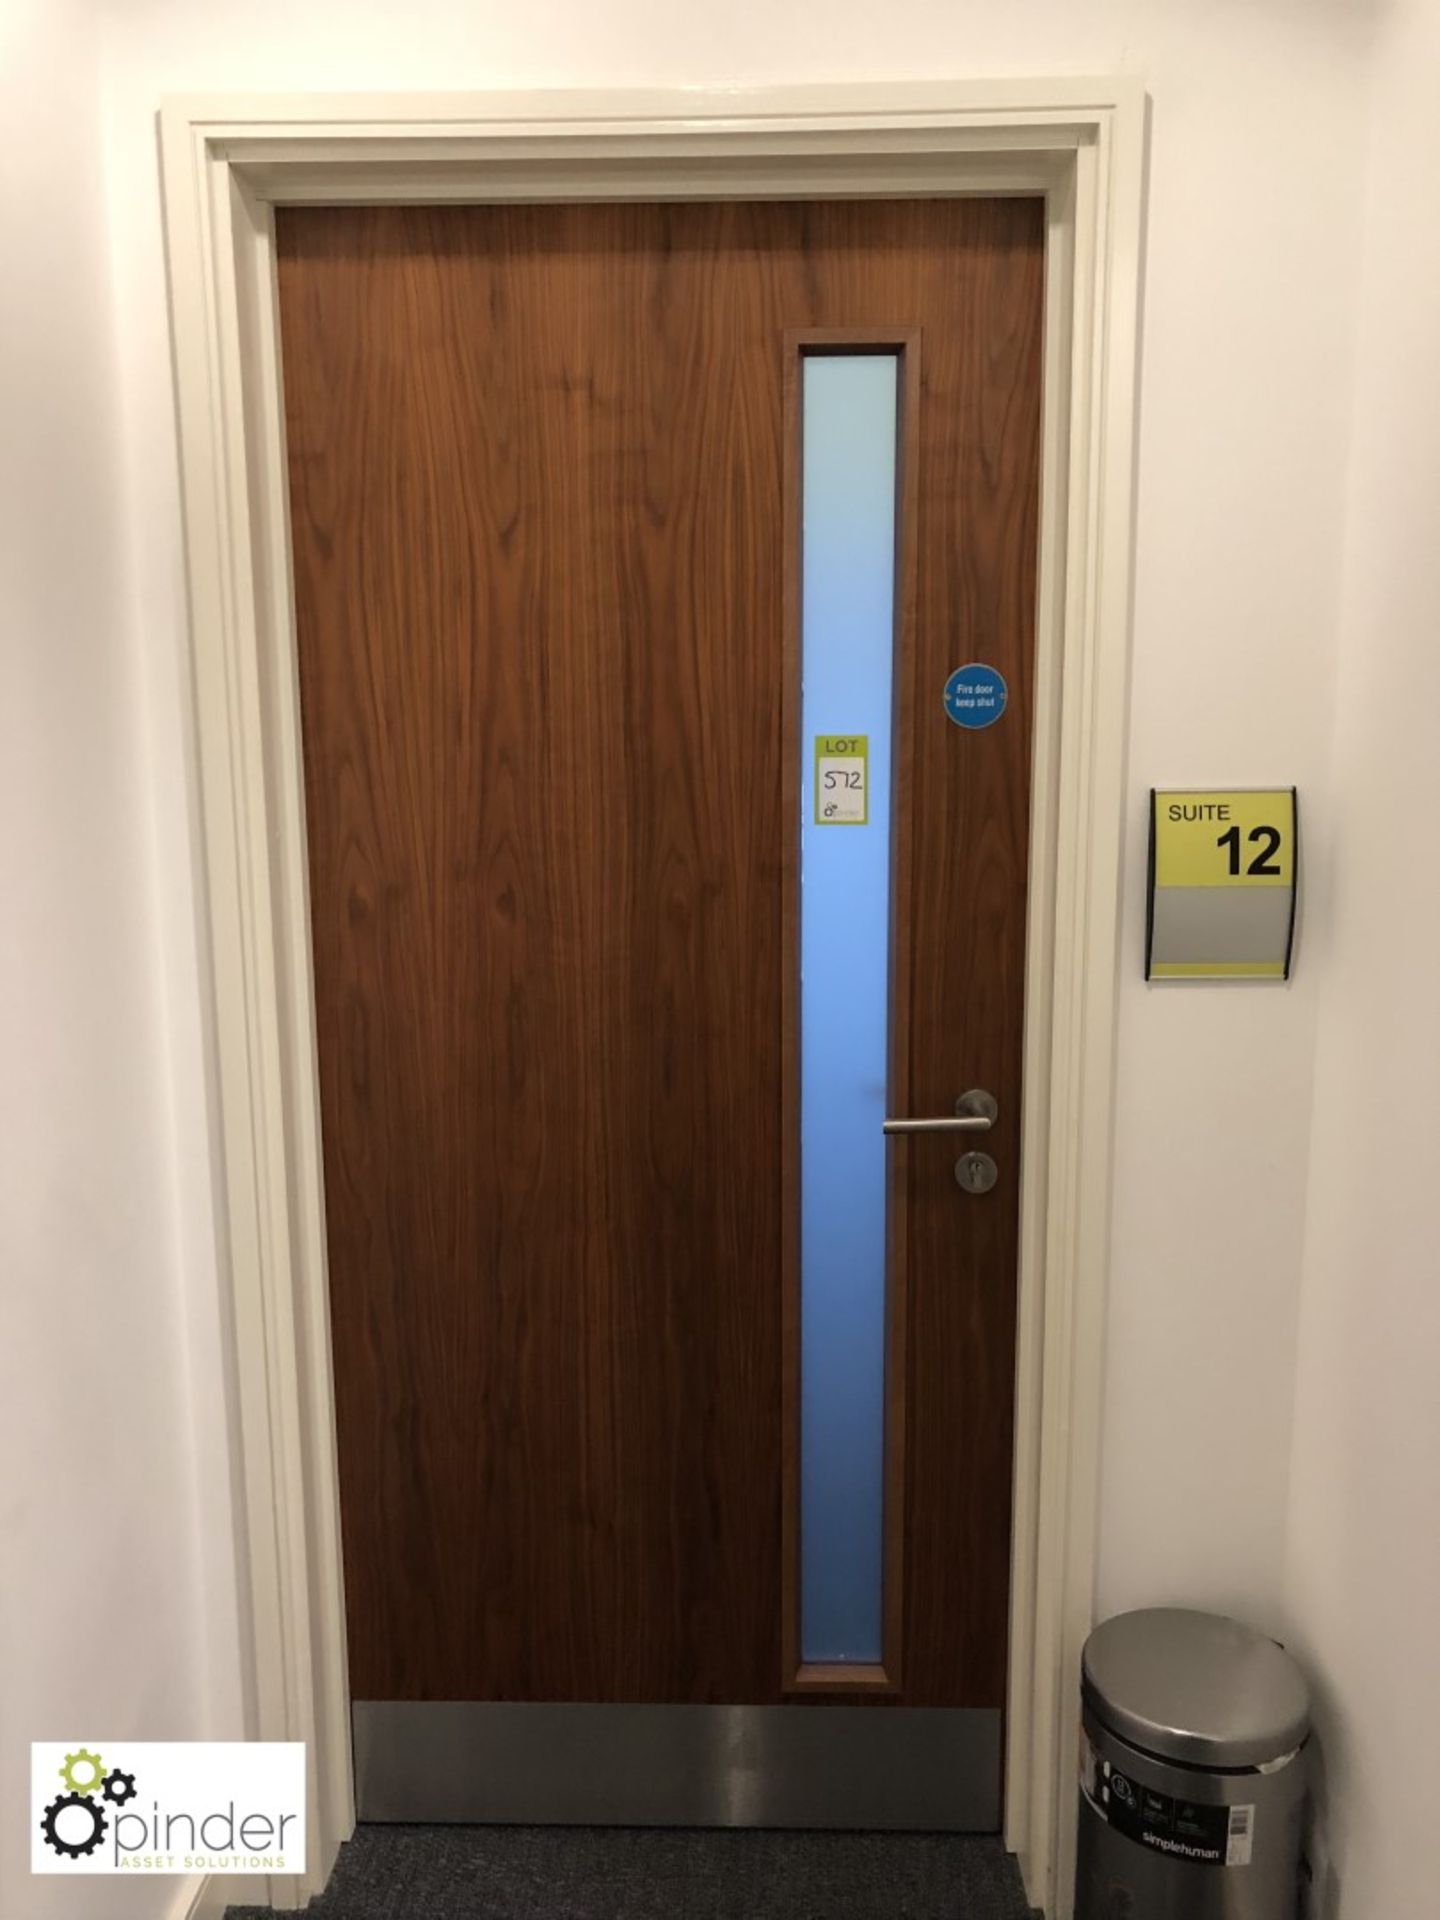 2 Fire Doors, approx. 2050mm x 880mm, with door closer and kickplate (located First Floor,